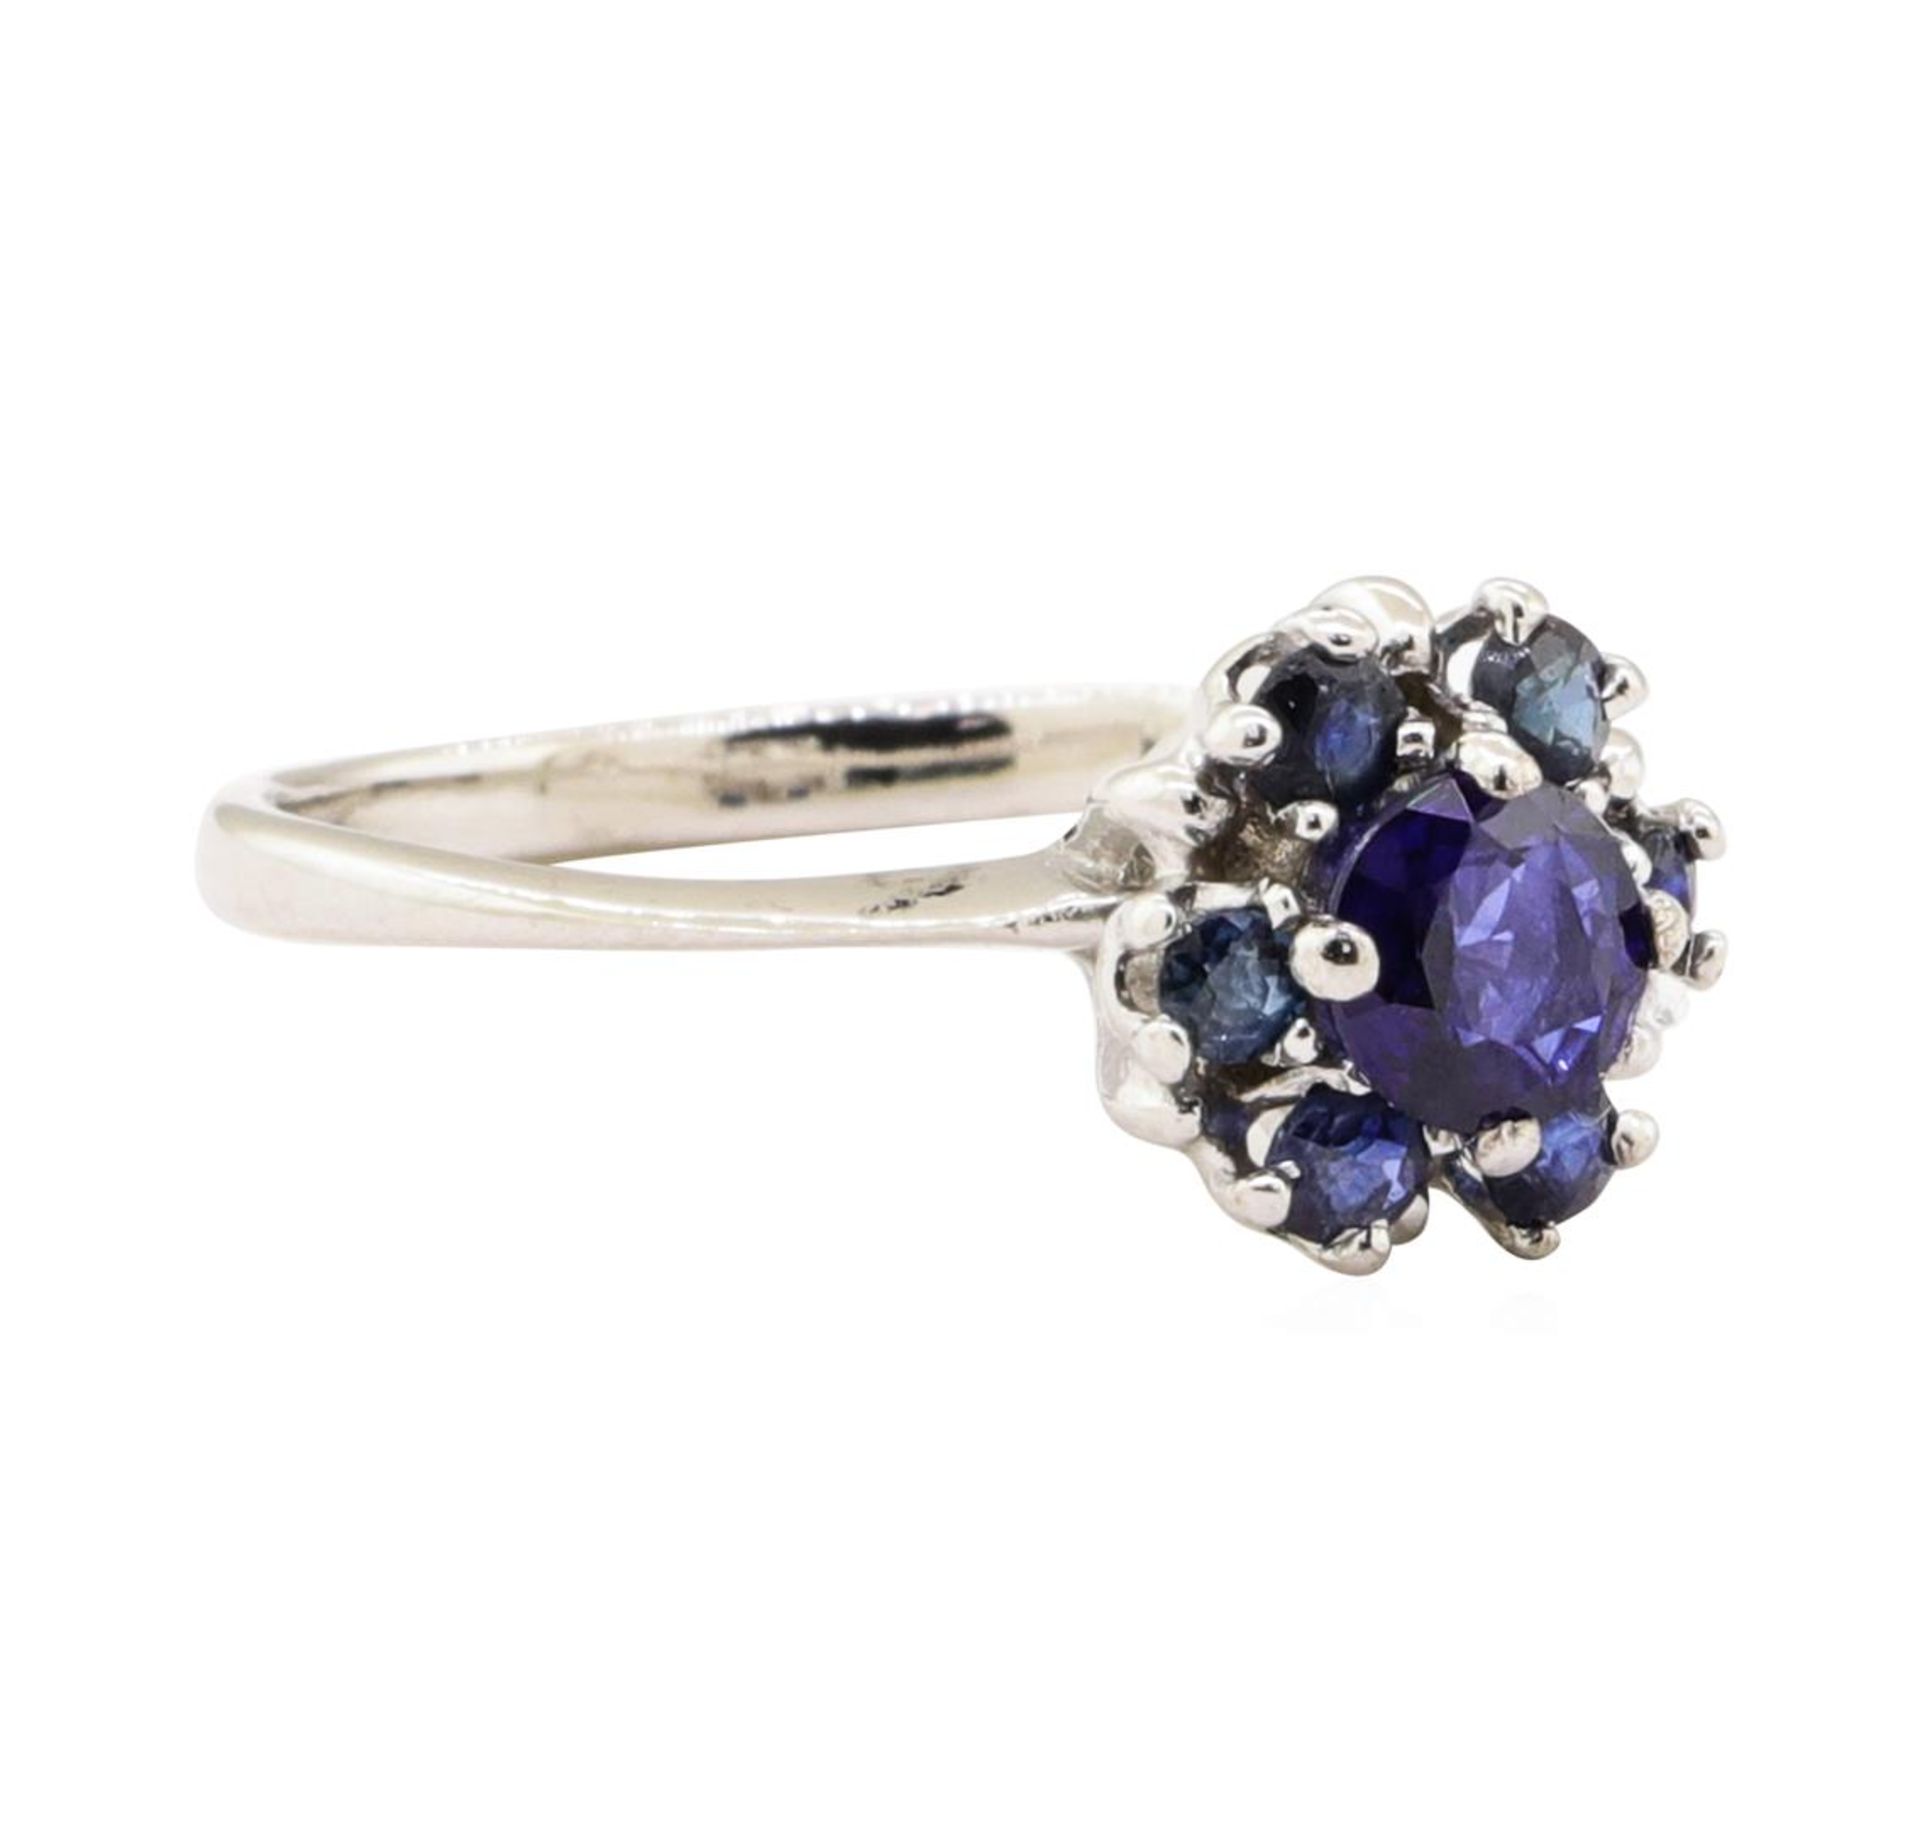 0.67ctw Blue Sapphire Ring - 14KT White Gold